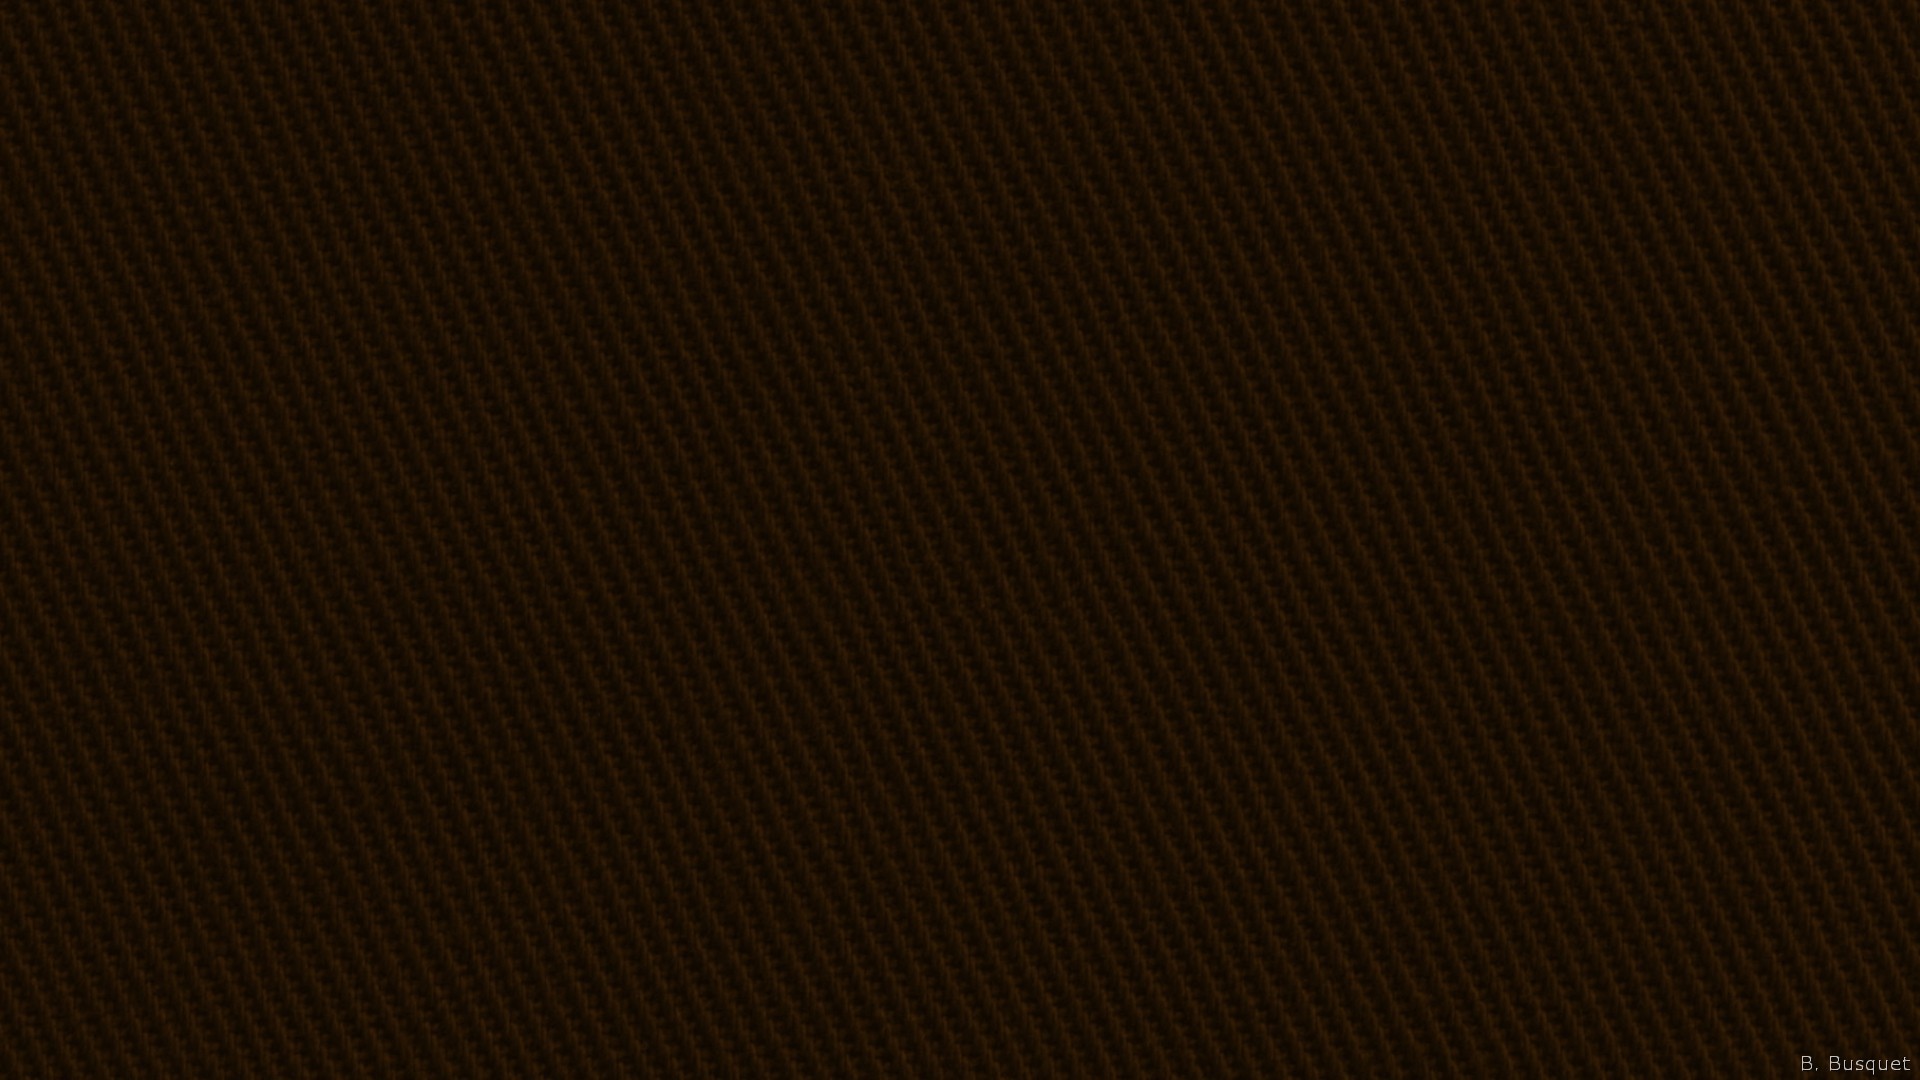 1920x1080 Simple dark brown wallpaper with a weave pattern.